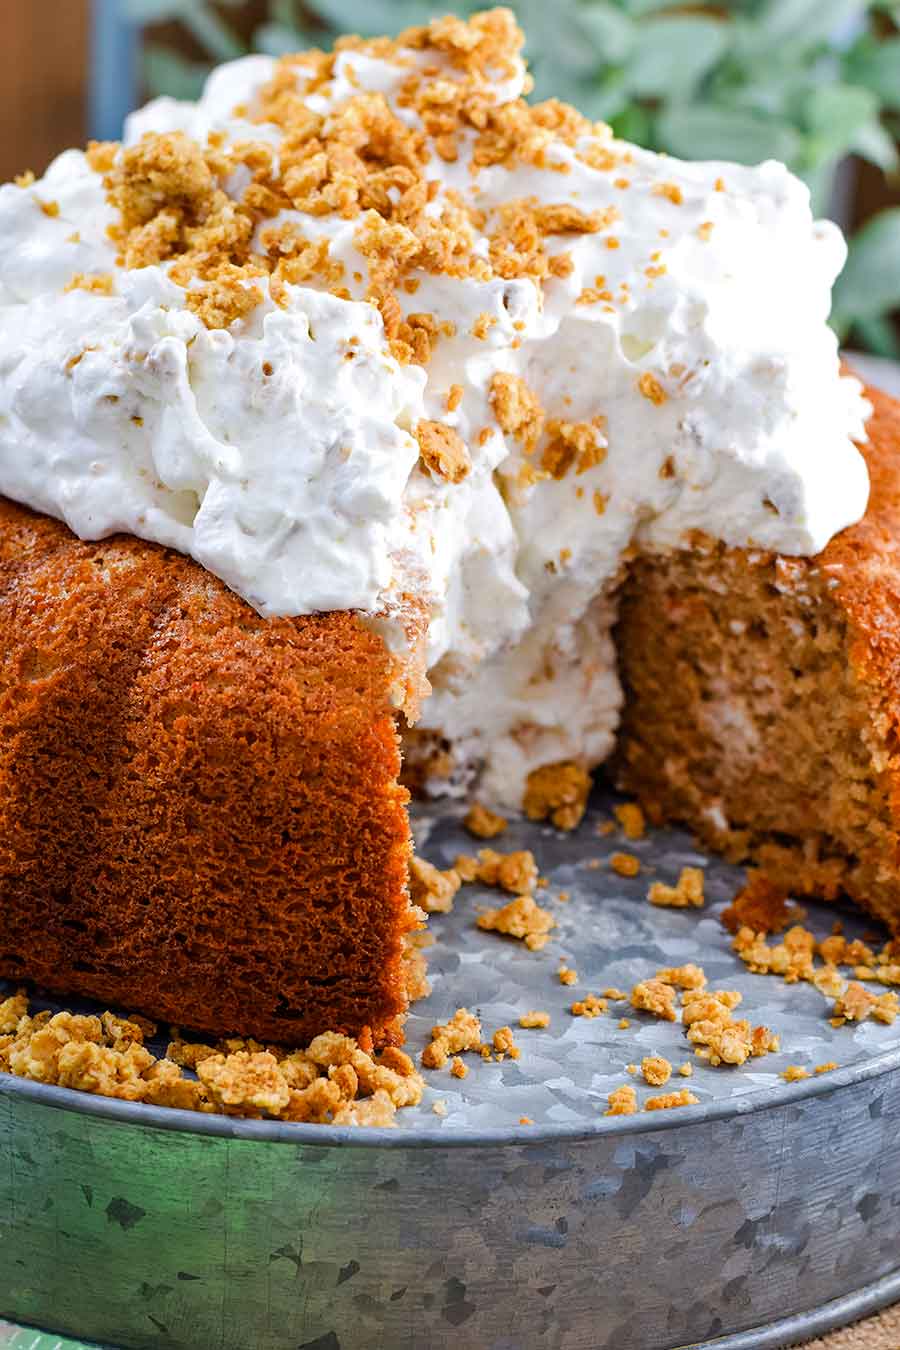 A side view of this easy carrot cake with whipped cream icing with two slices removed revealing the moist bundt cake center